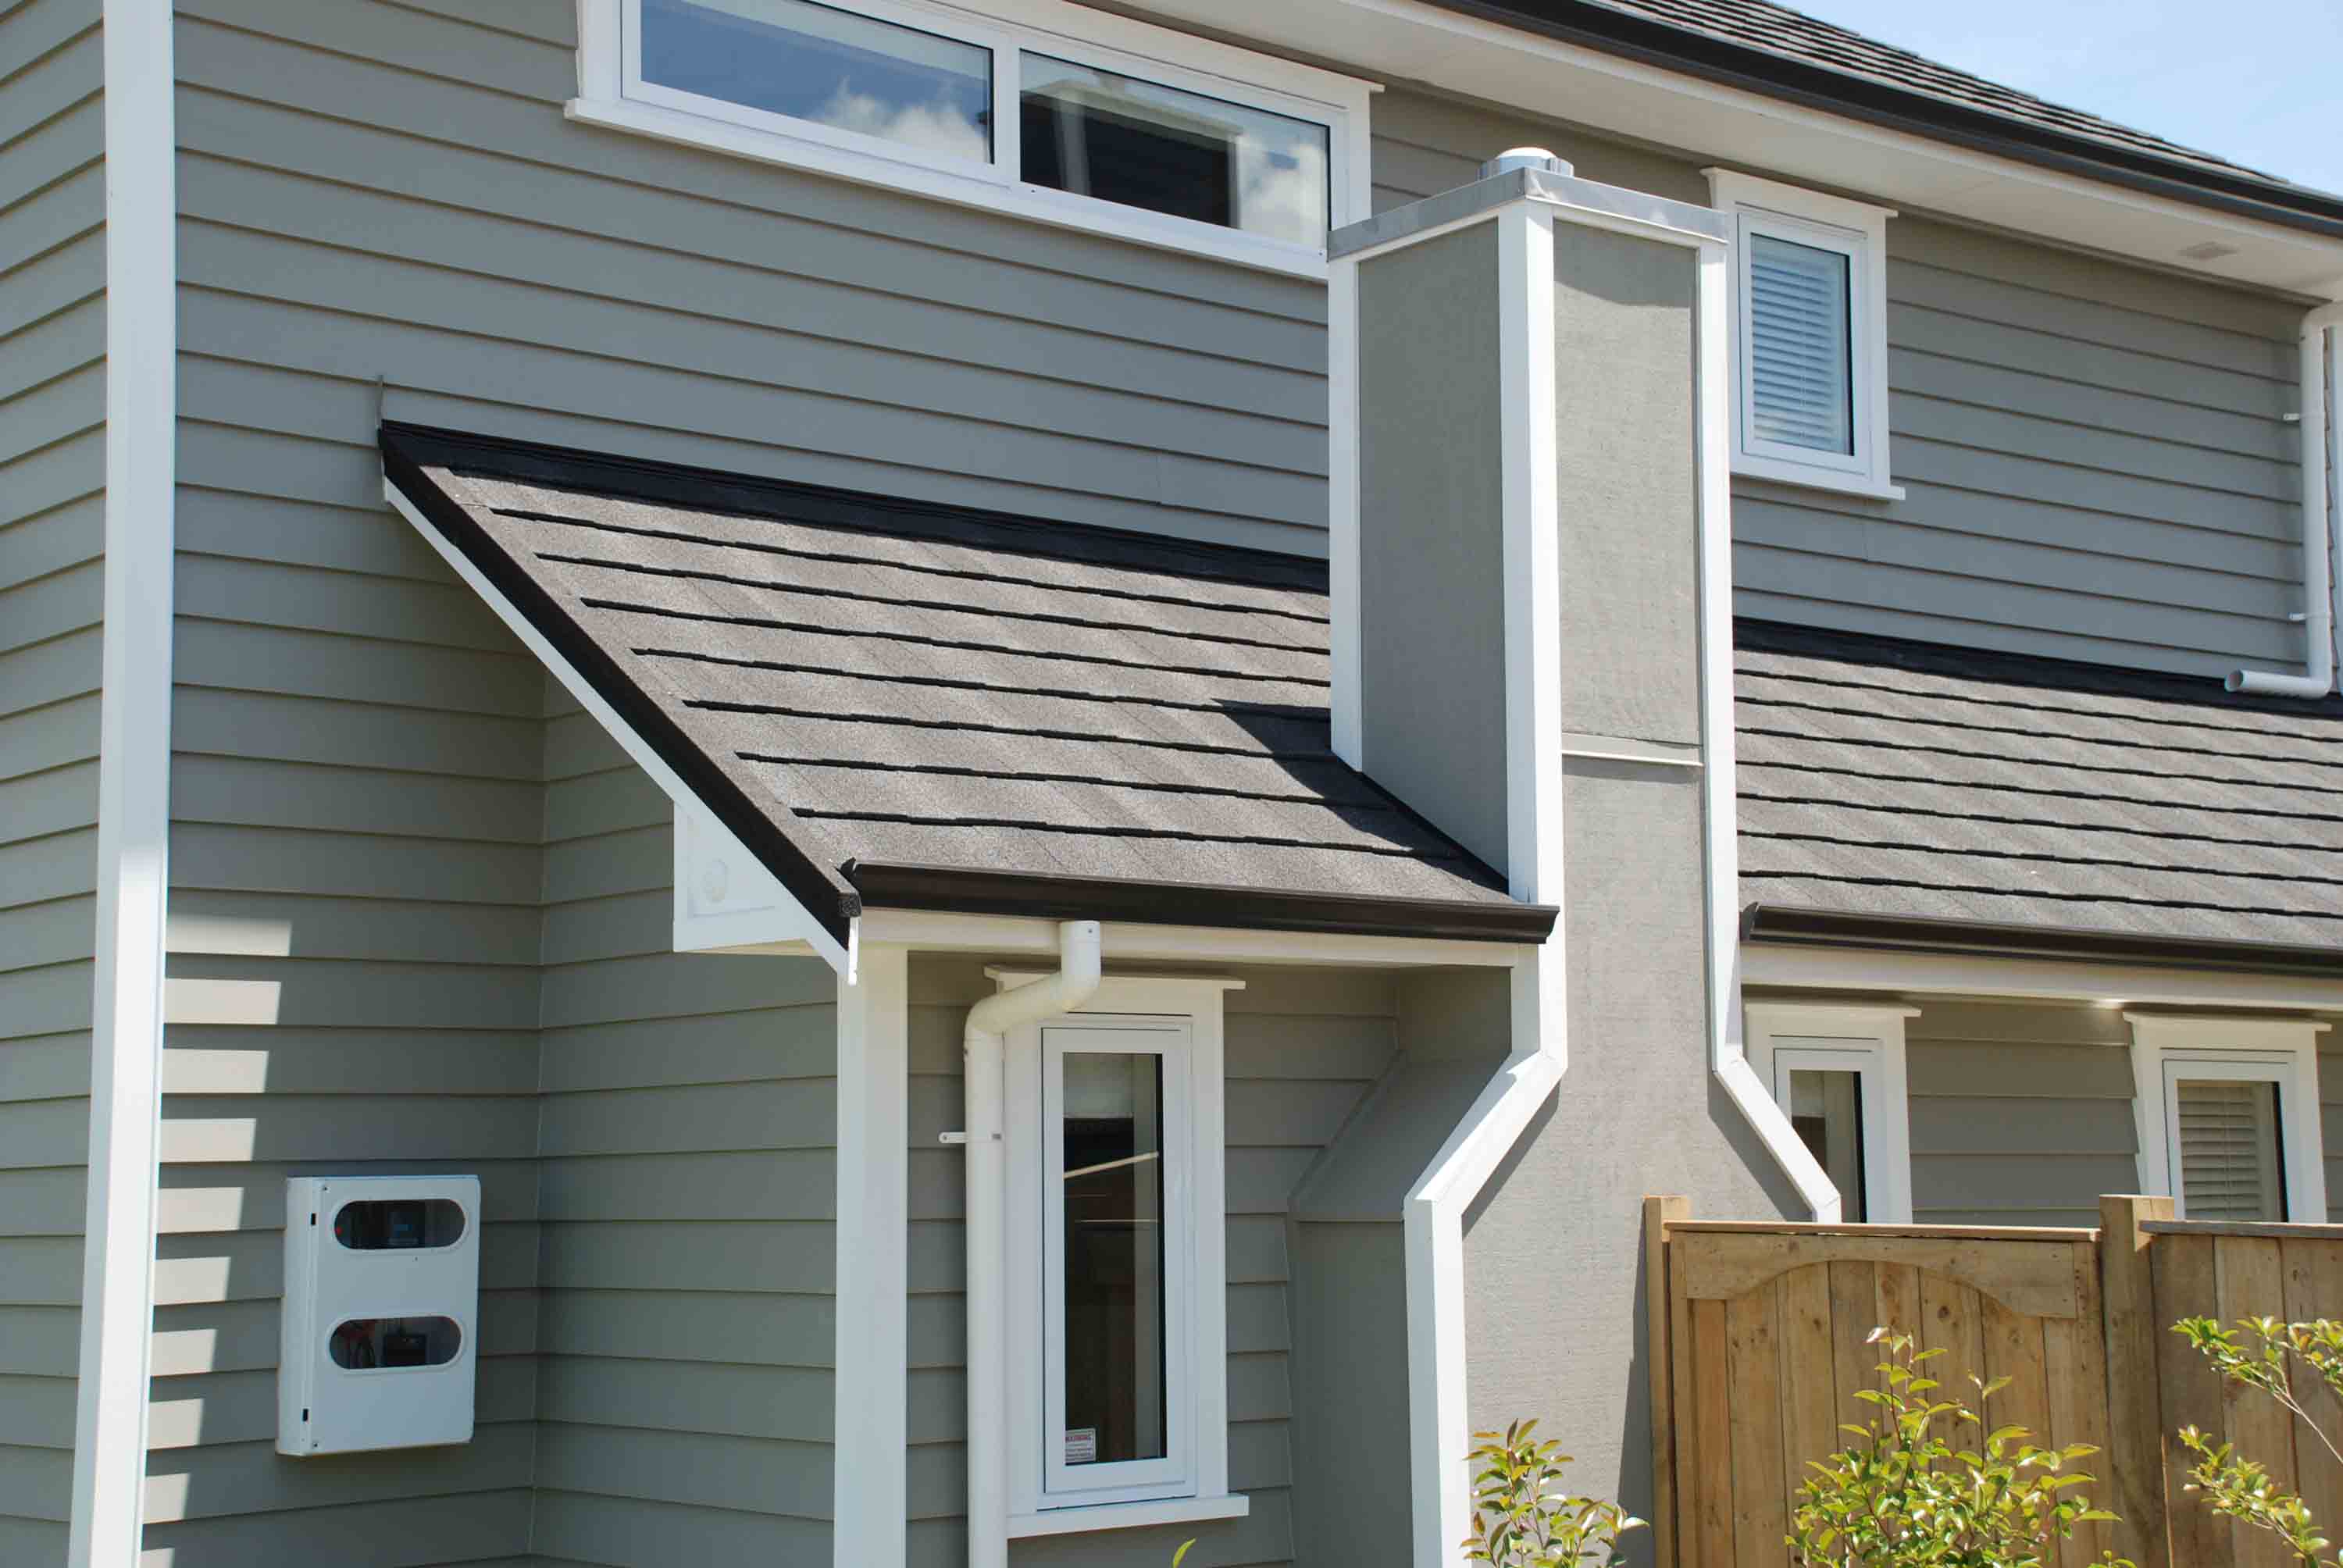 Grey weatherboard home with white joinery, featuring a CF Slate metal roof.